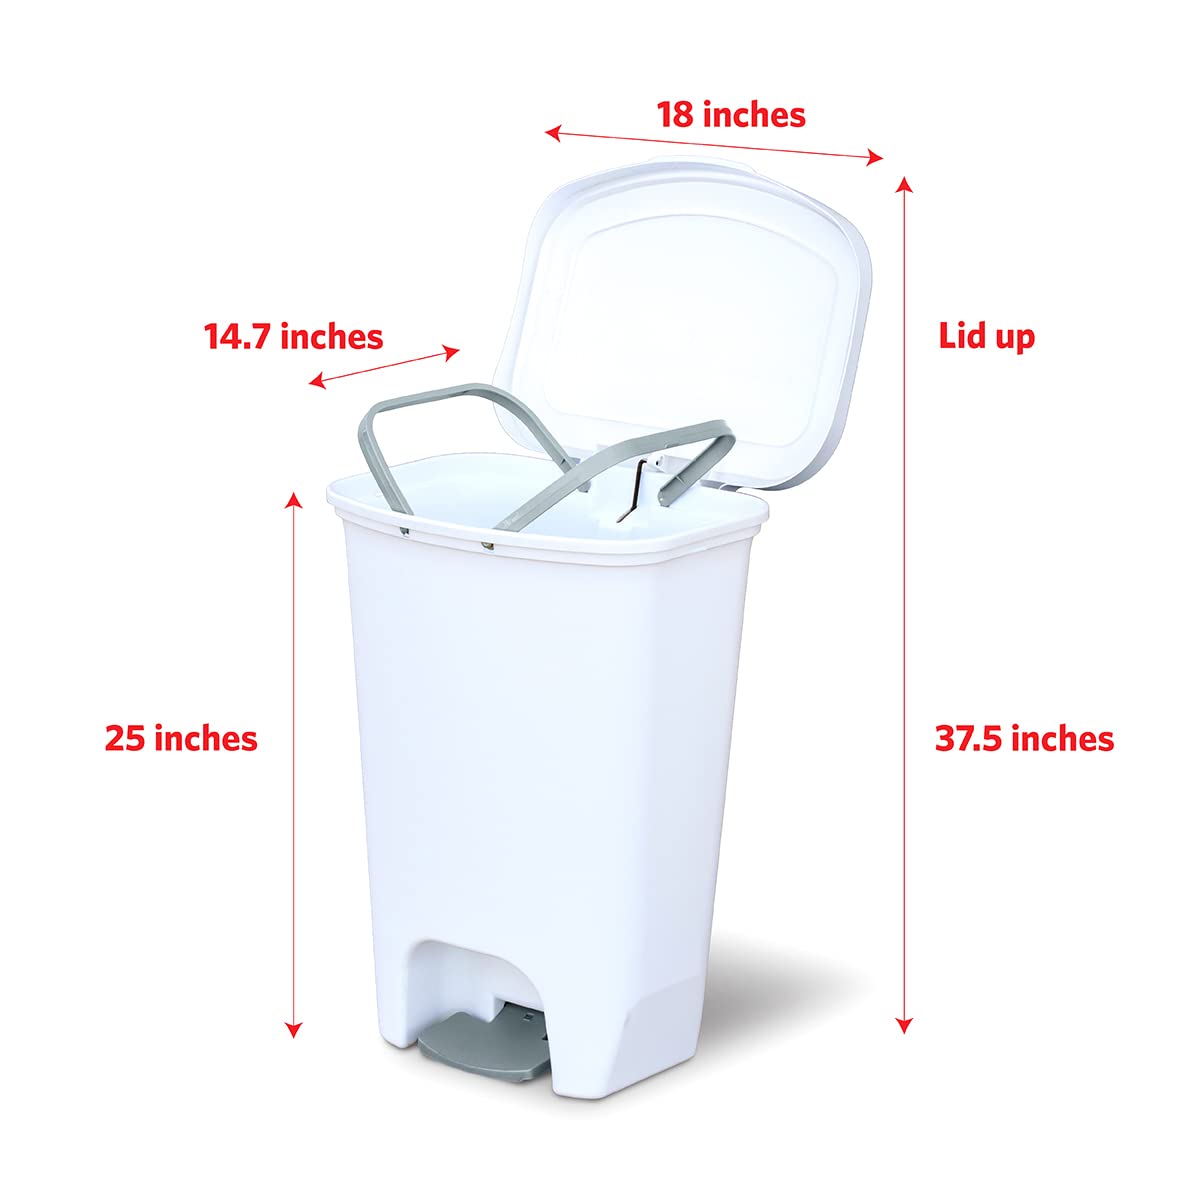 https://bigbigmart.com/wp-content/uploads/2023/10/Glad-13-Gallon-Trash-Can-Plastic-Kitchen-Waste-Bin-with-Odor-Protection-of-Lid-Hands-Free-with-Step-On-Foot-Pedal-and-Garbage-Bag-Rings-13-Gallon-White2.jpg